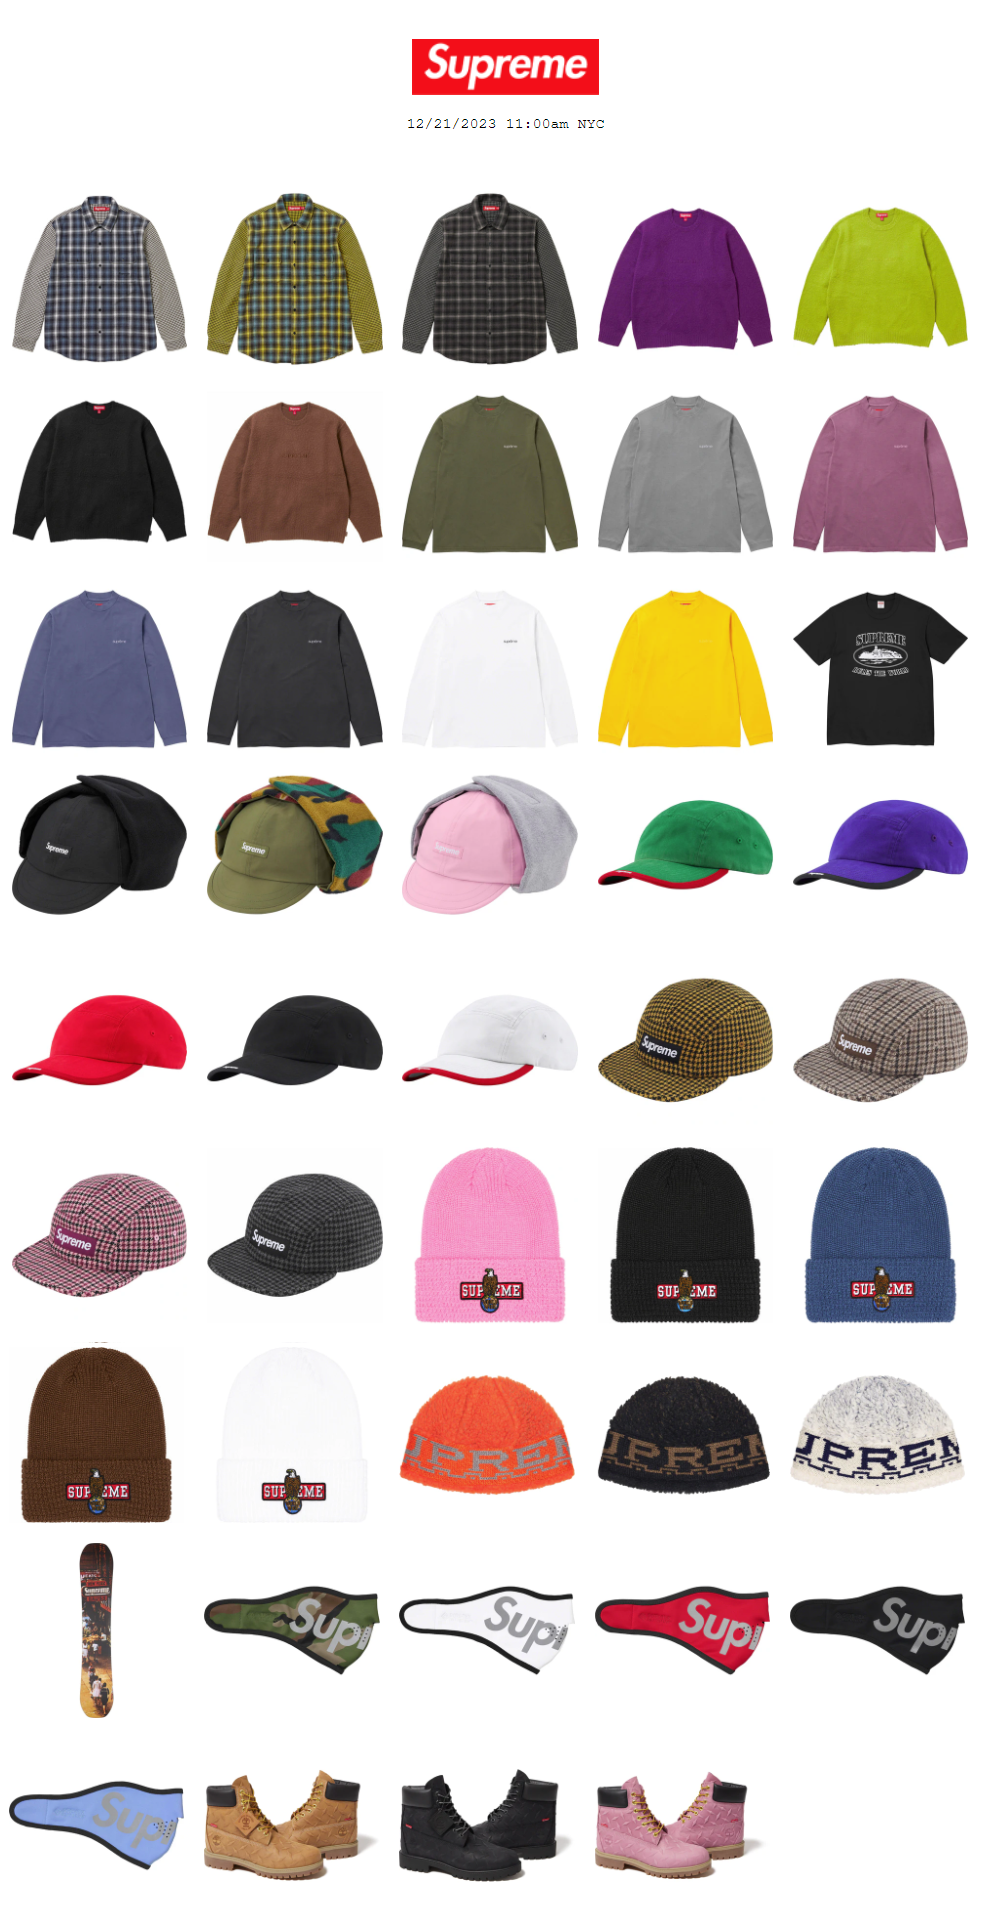 Supreme 公式通販サイトで12月23日 Week18に発売予定の23FW 23AW 新作 ...